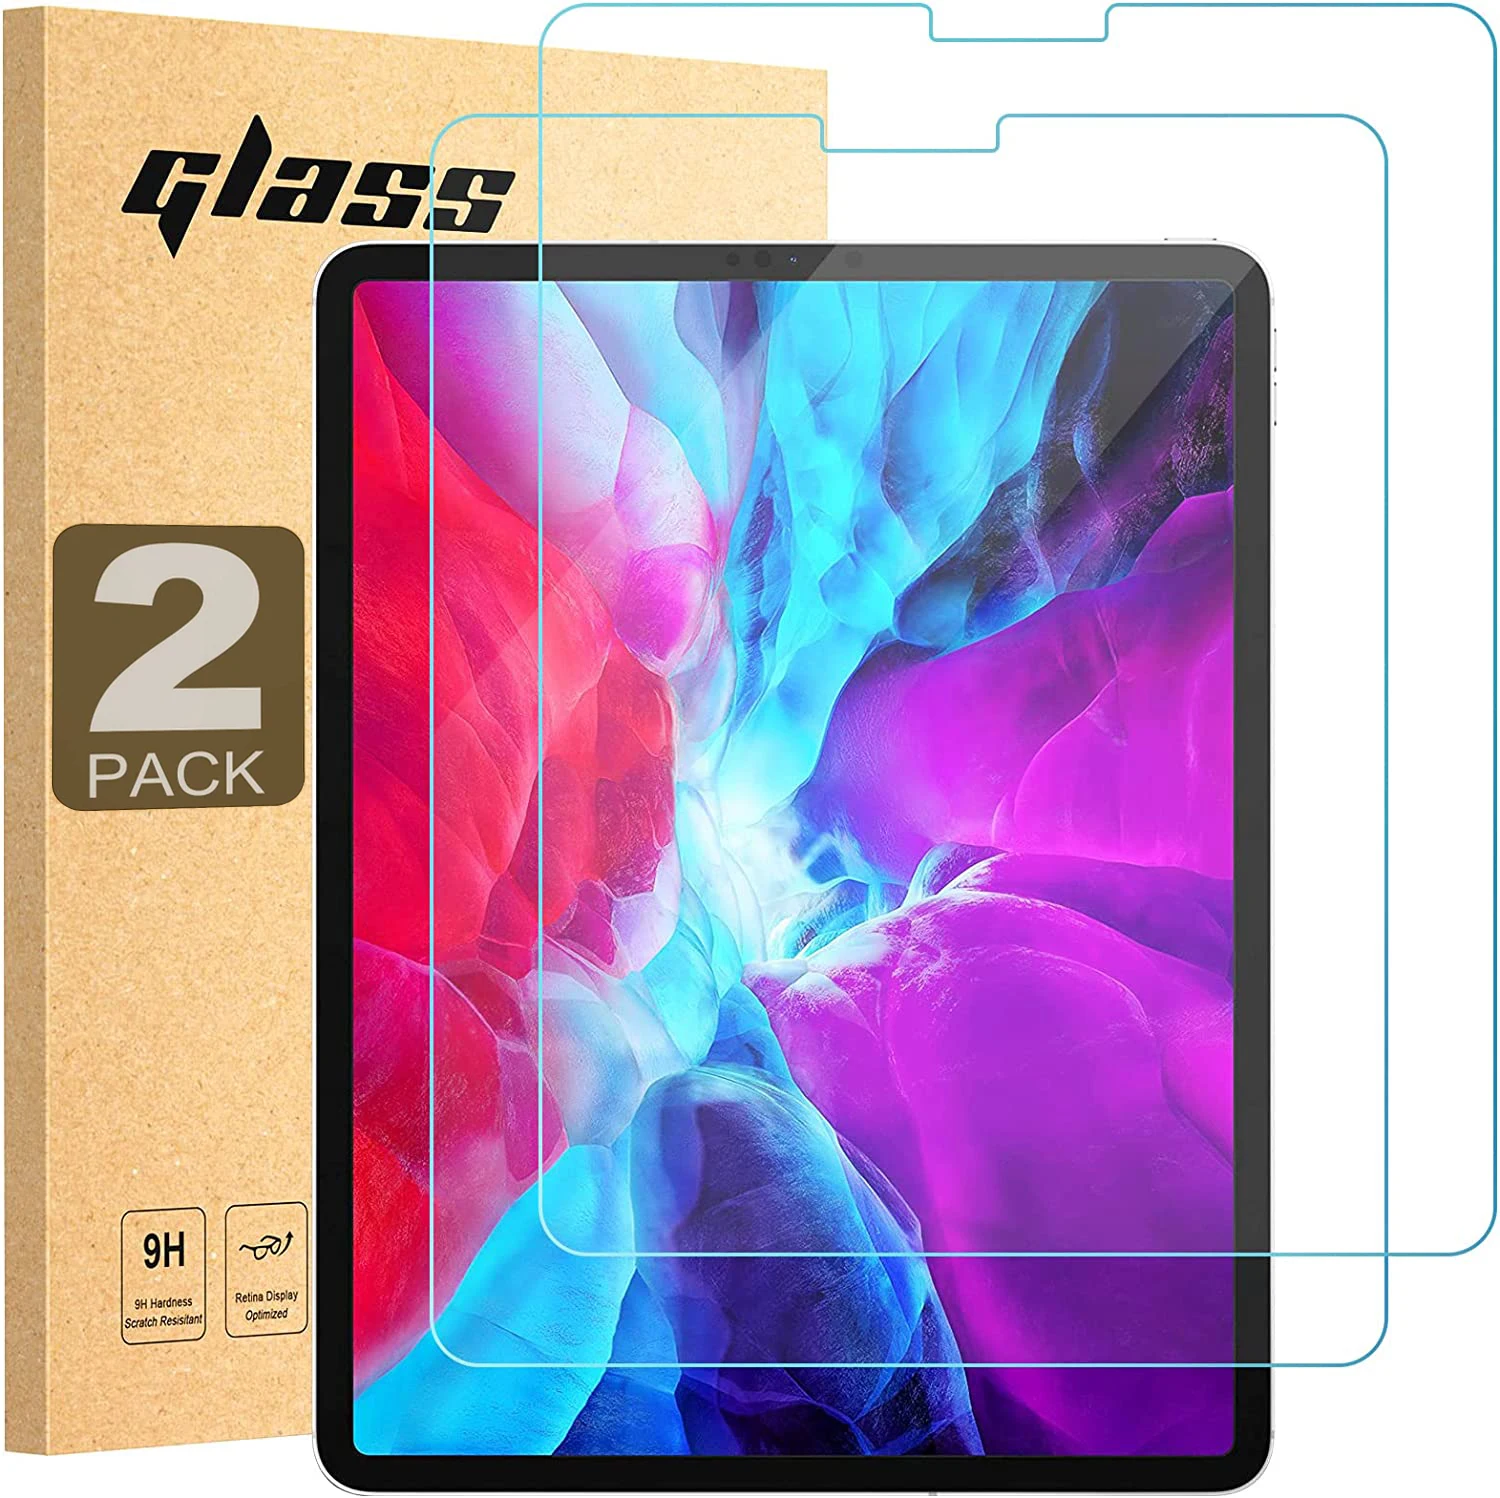 2pcs Screen Protector Tempered Glass For iPad Pro 12.9 2020 2018 2015 2017 2021 2022 A2232 A2437 A1670 Full Coverage Tablet Film 2pcs tablet tempered glass screen protector cover for apple ipad 8 ipad 7 hd full coverage protective film